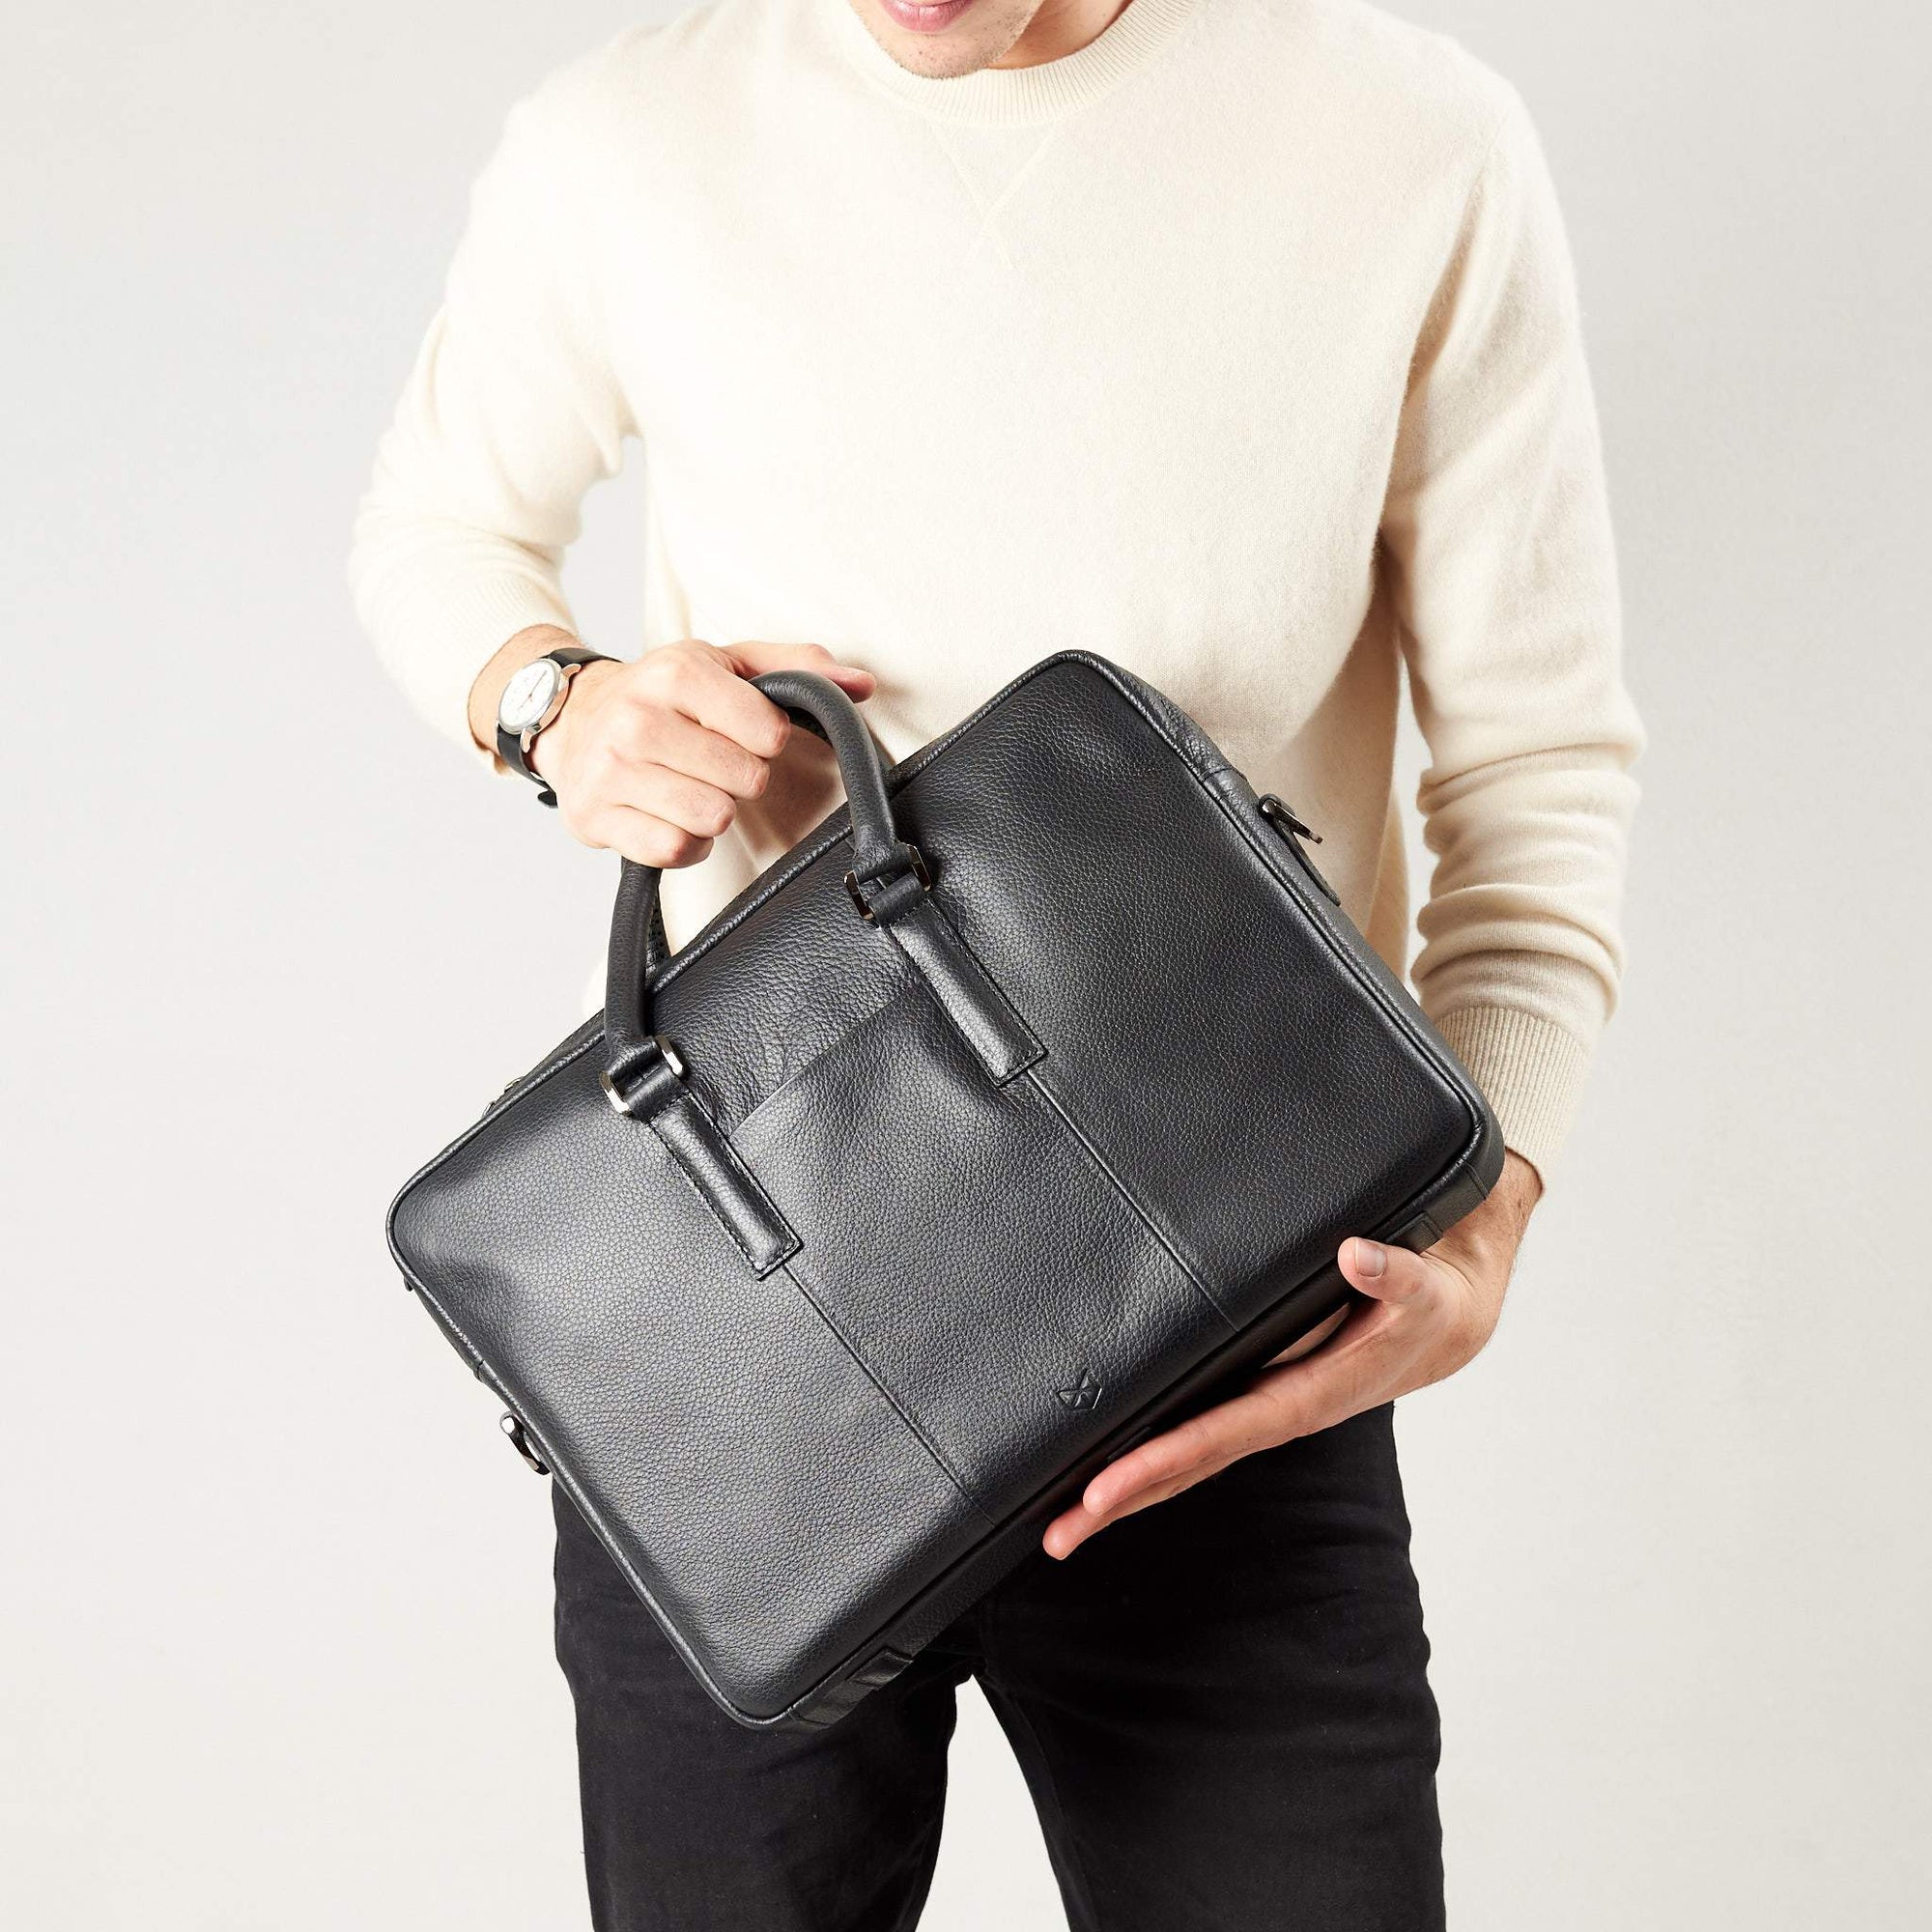 Briefcase with handmade straps in use by model. Black leather briefcase laptop bag for men. Gazeli laptop briefcase by Capra Leather